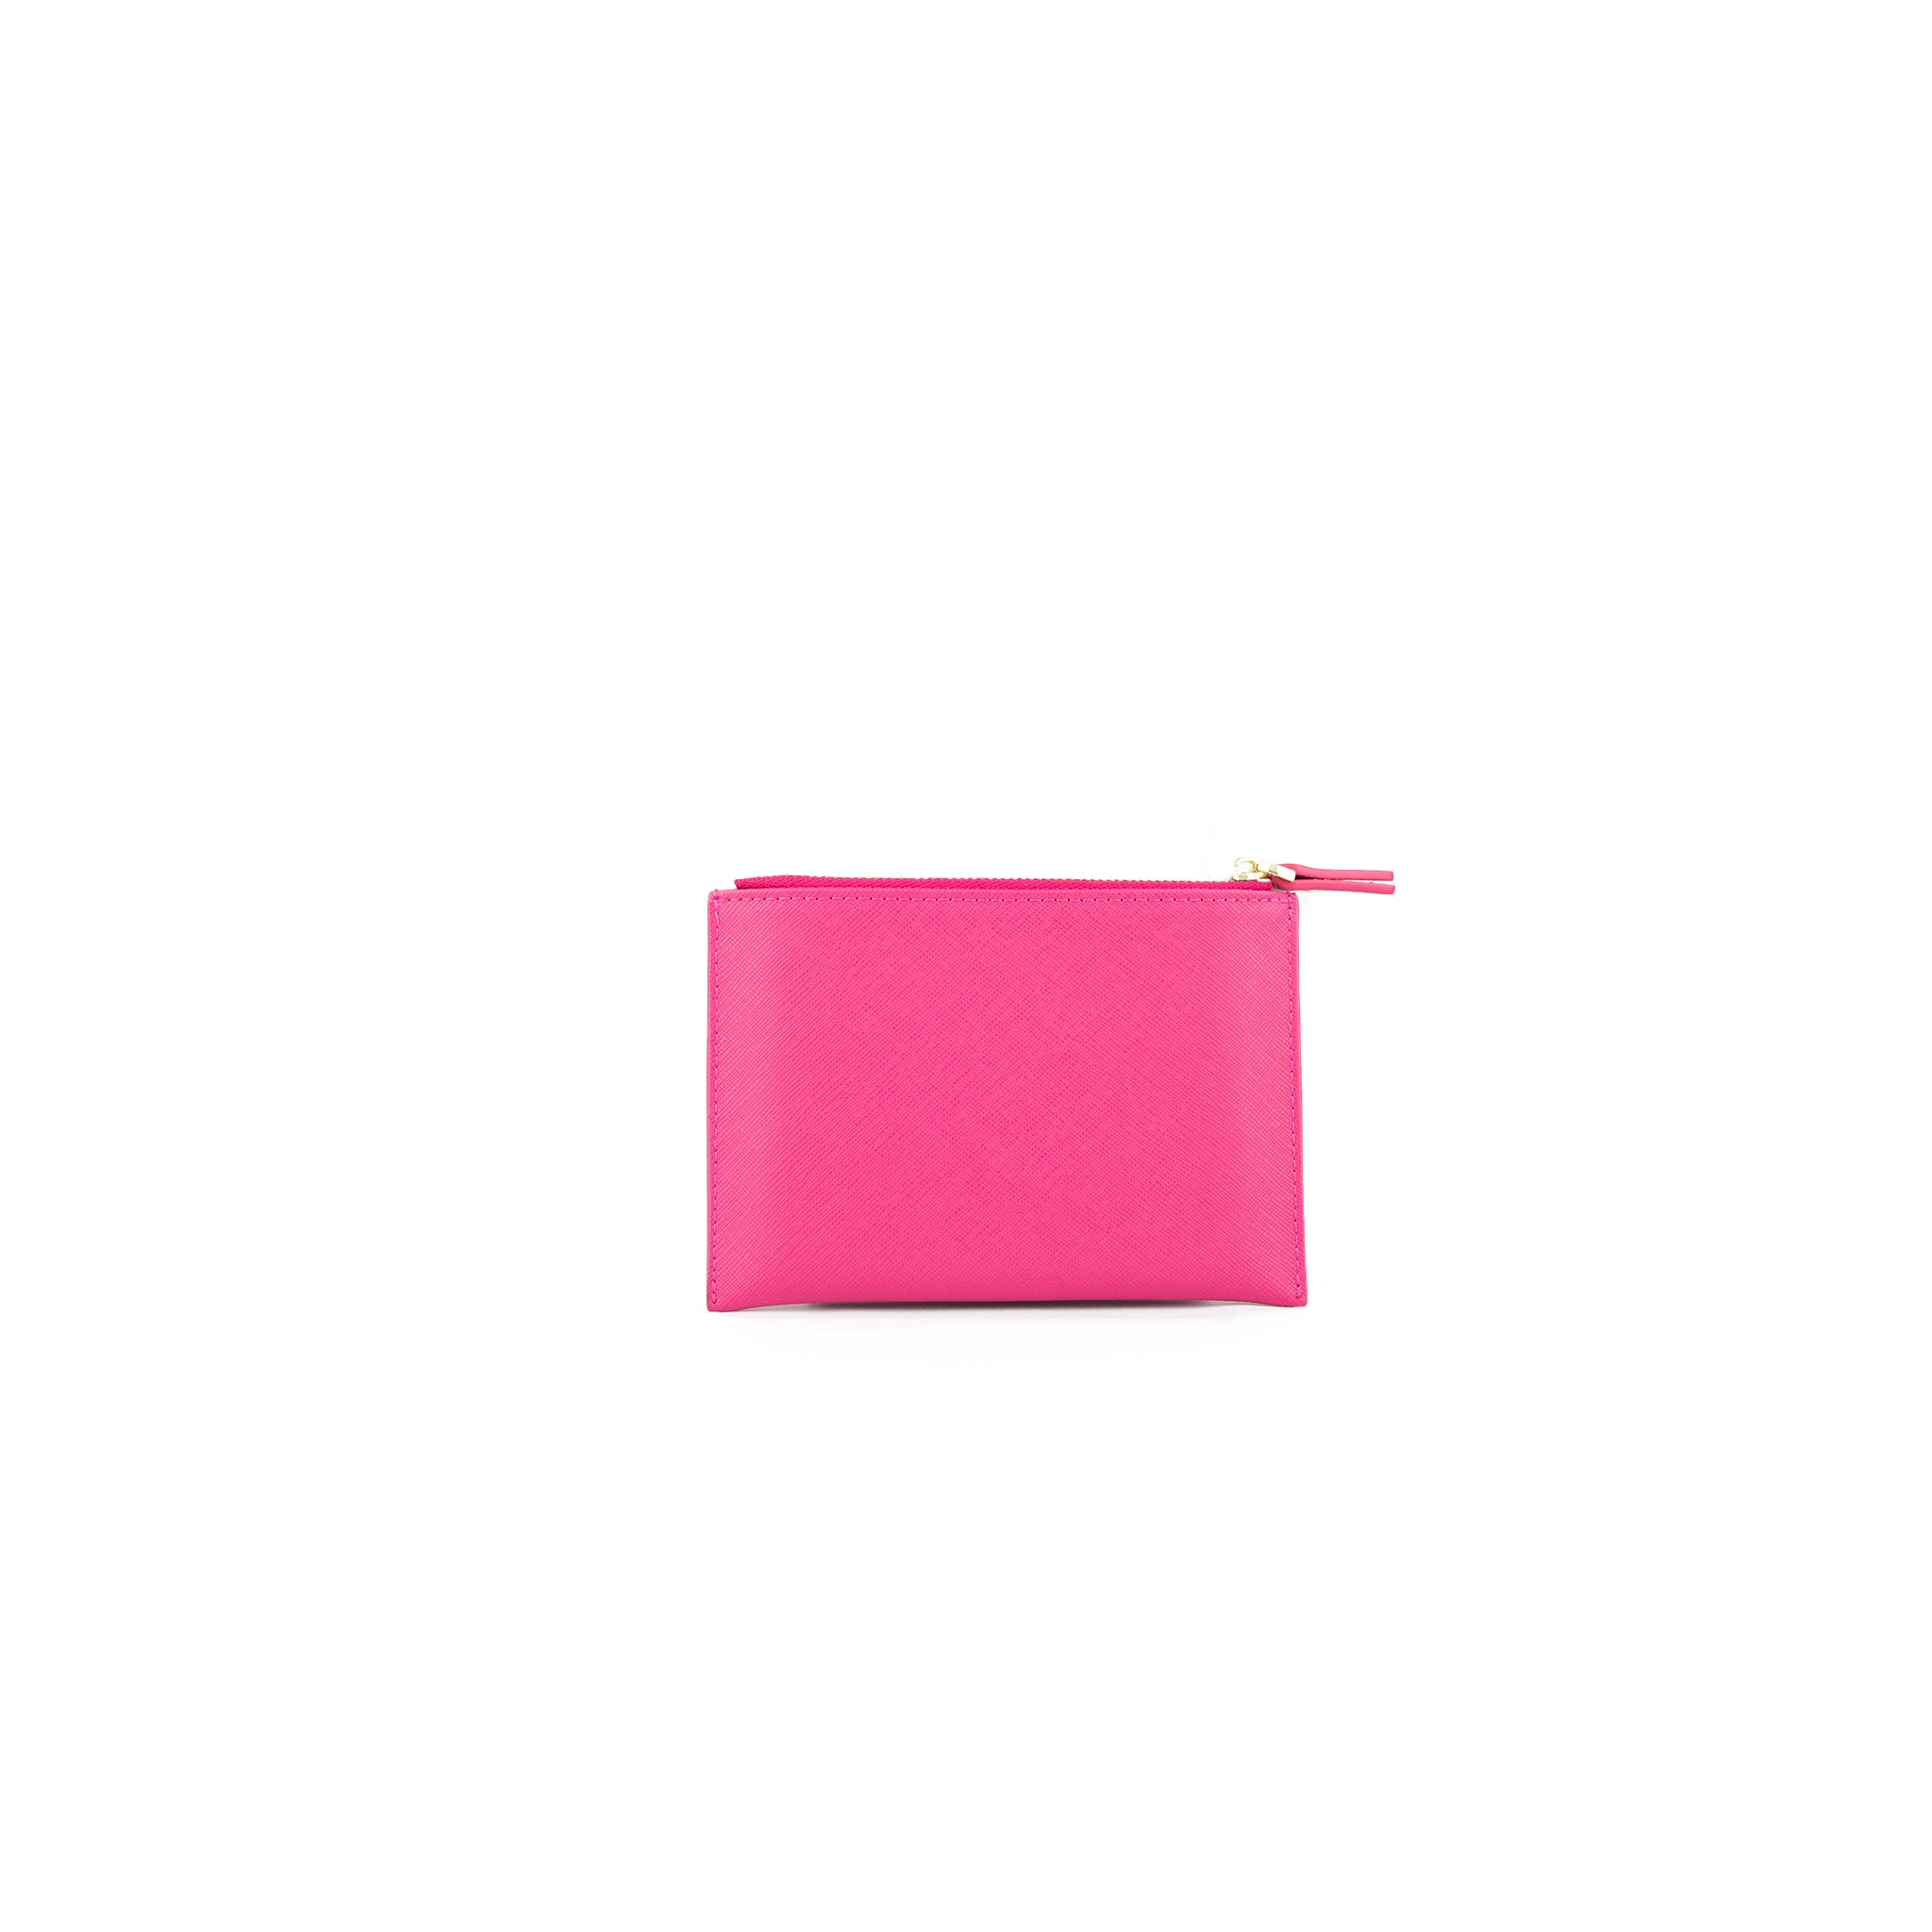 Coin Purse Pink Saffiano Leather Back